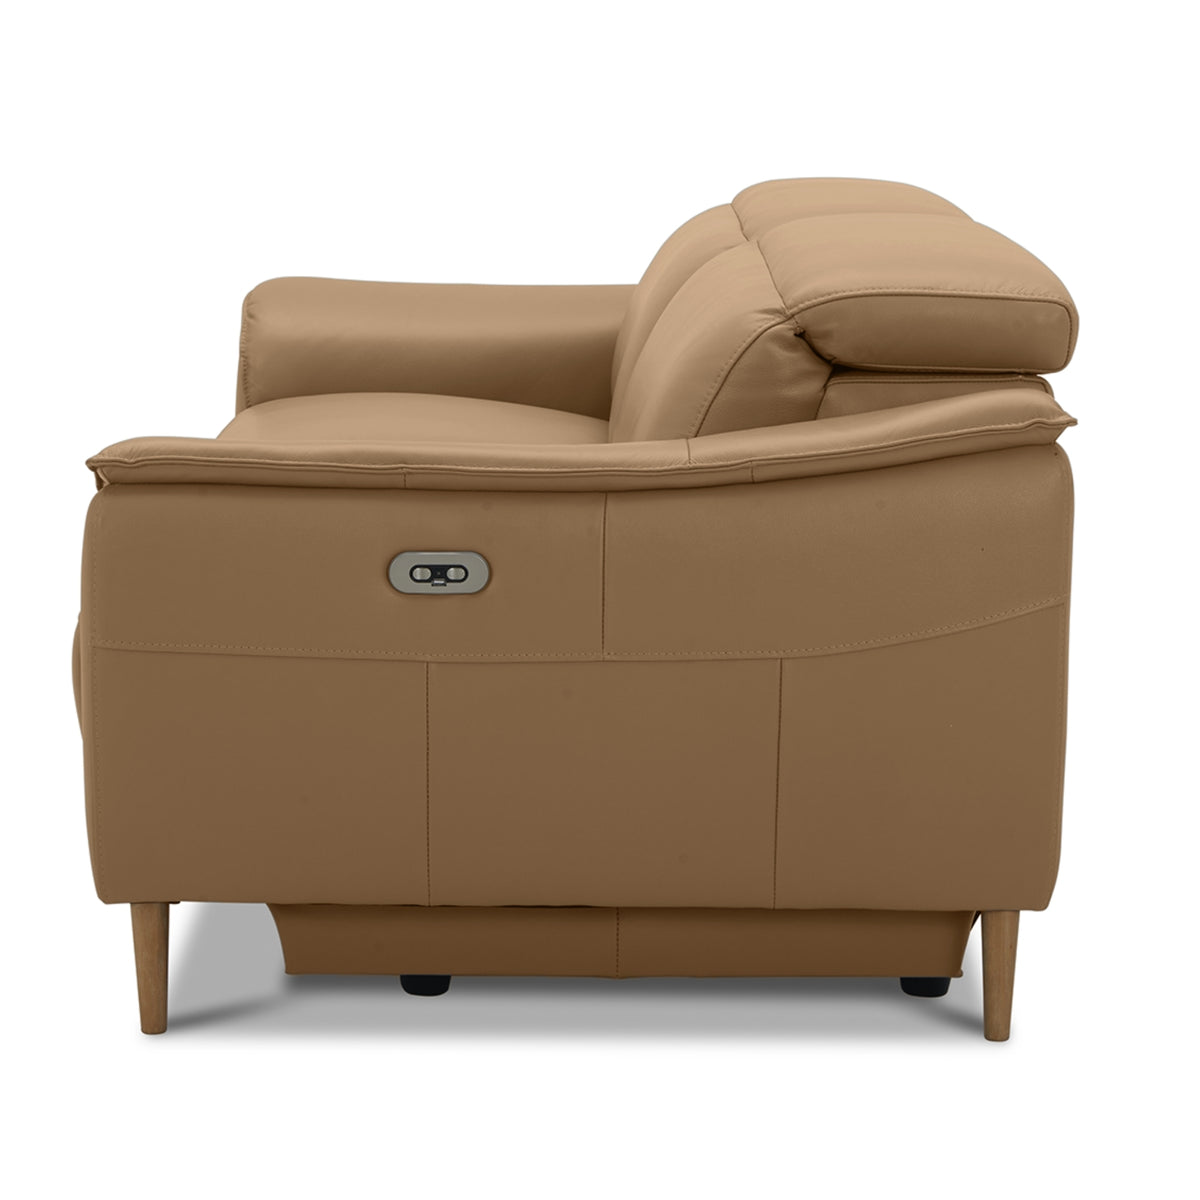 Inala 2.5 Seater Leather Electric Recliner Sofa Latte 